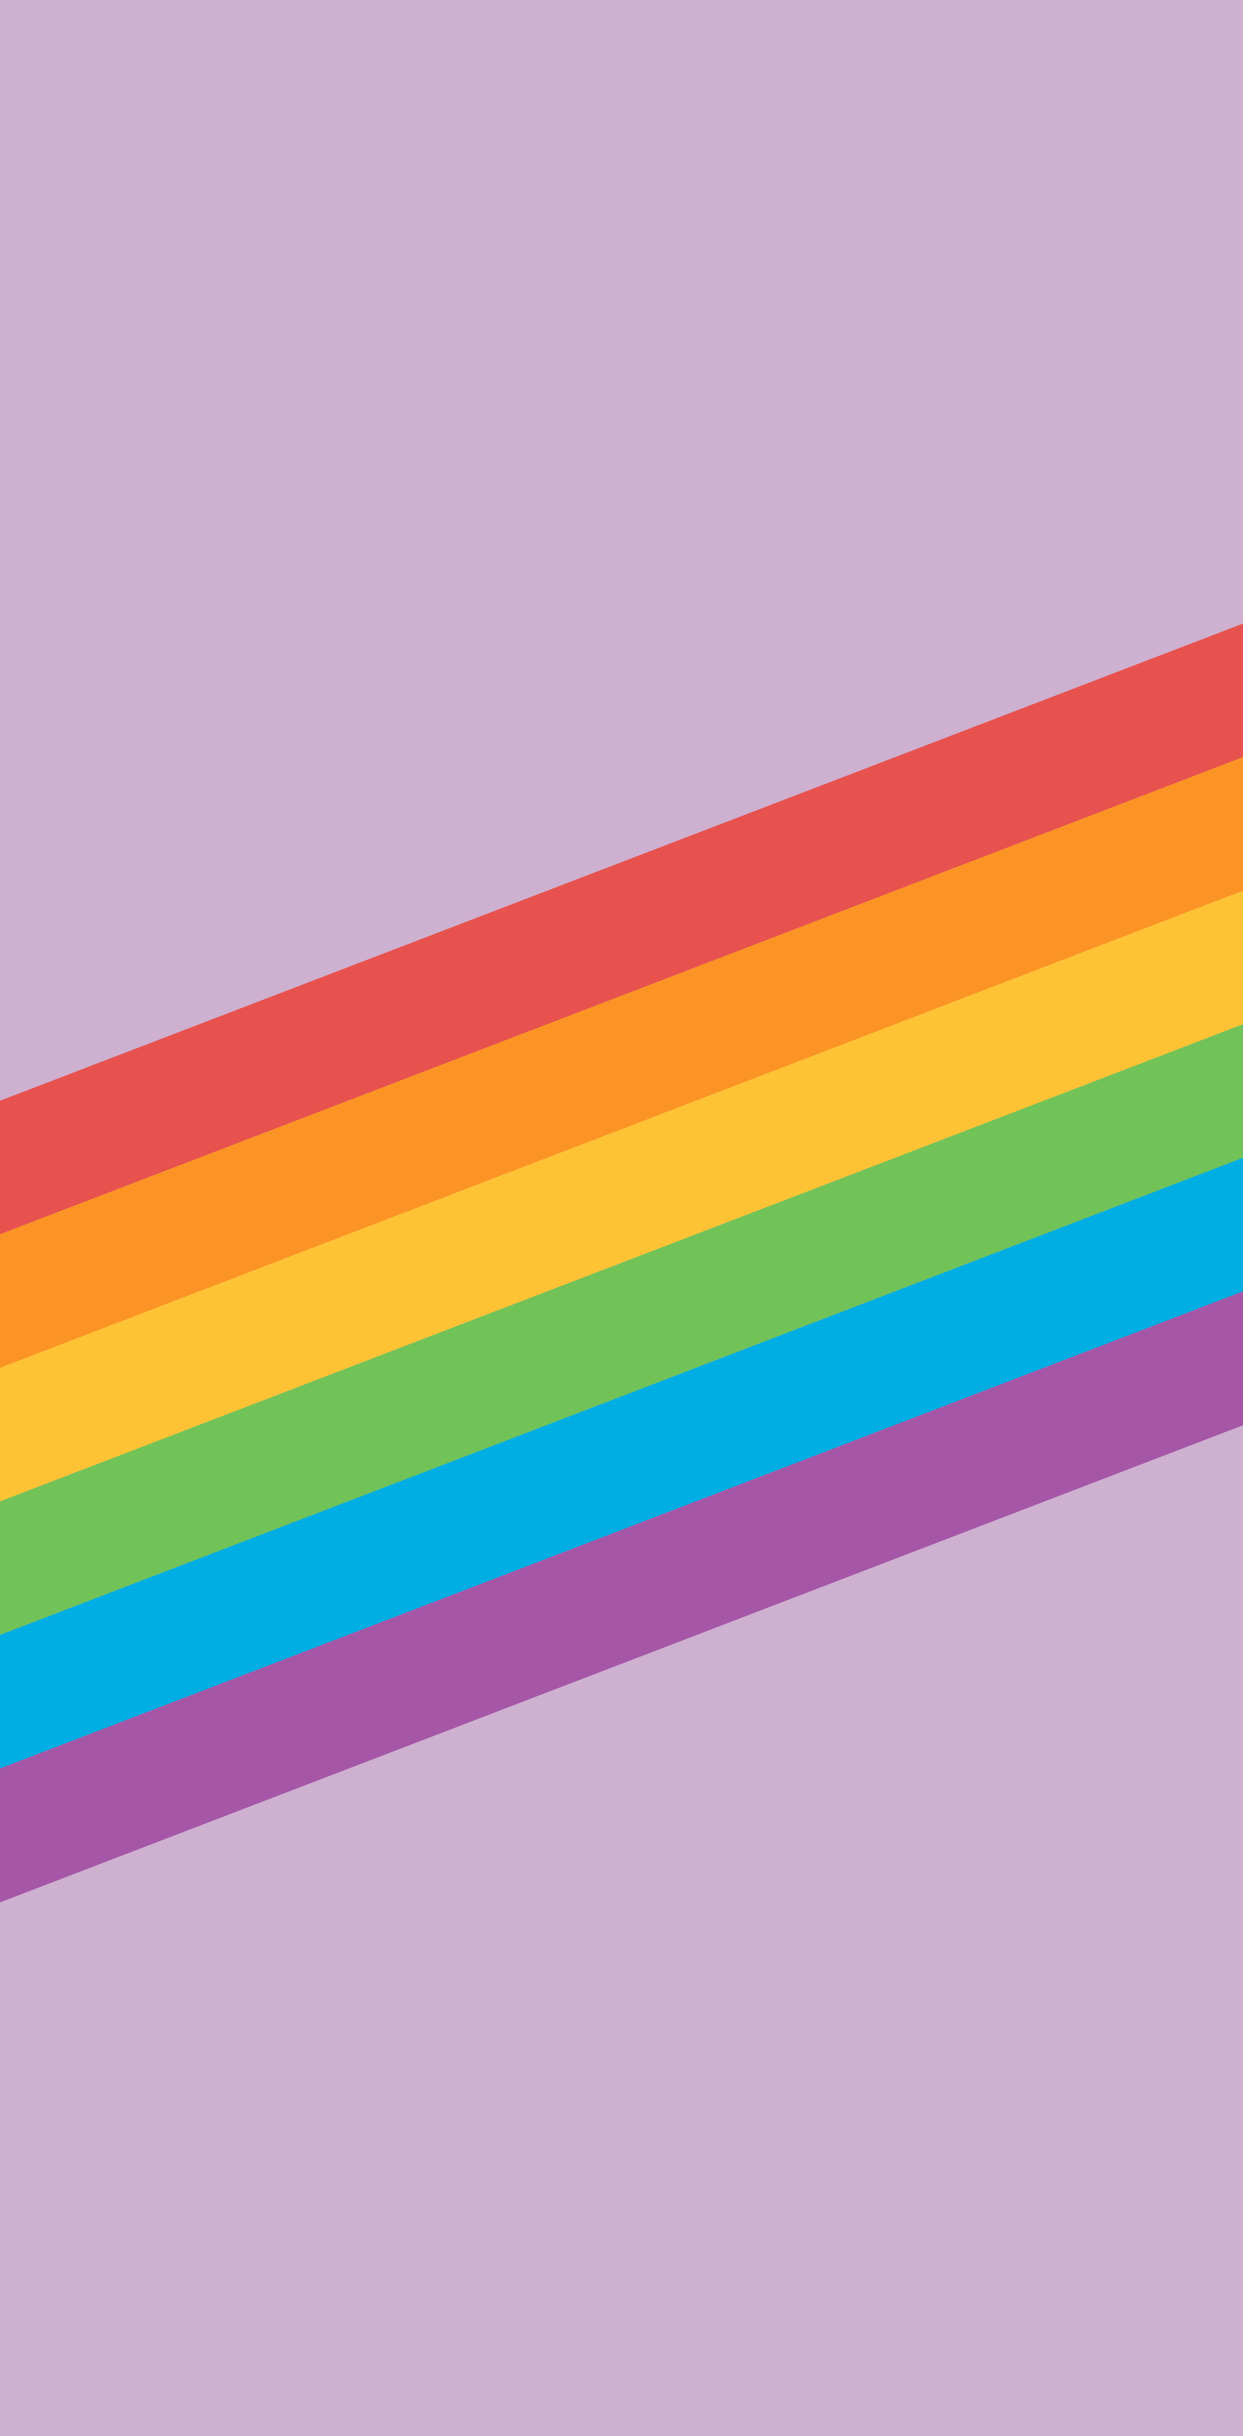 Pride flag, sign of unity and support for the LGBT community